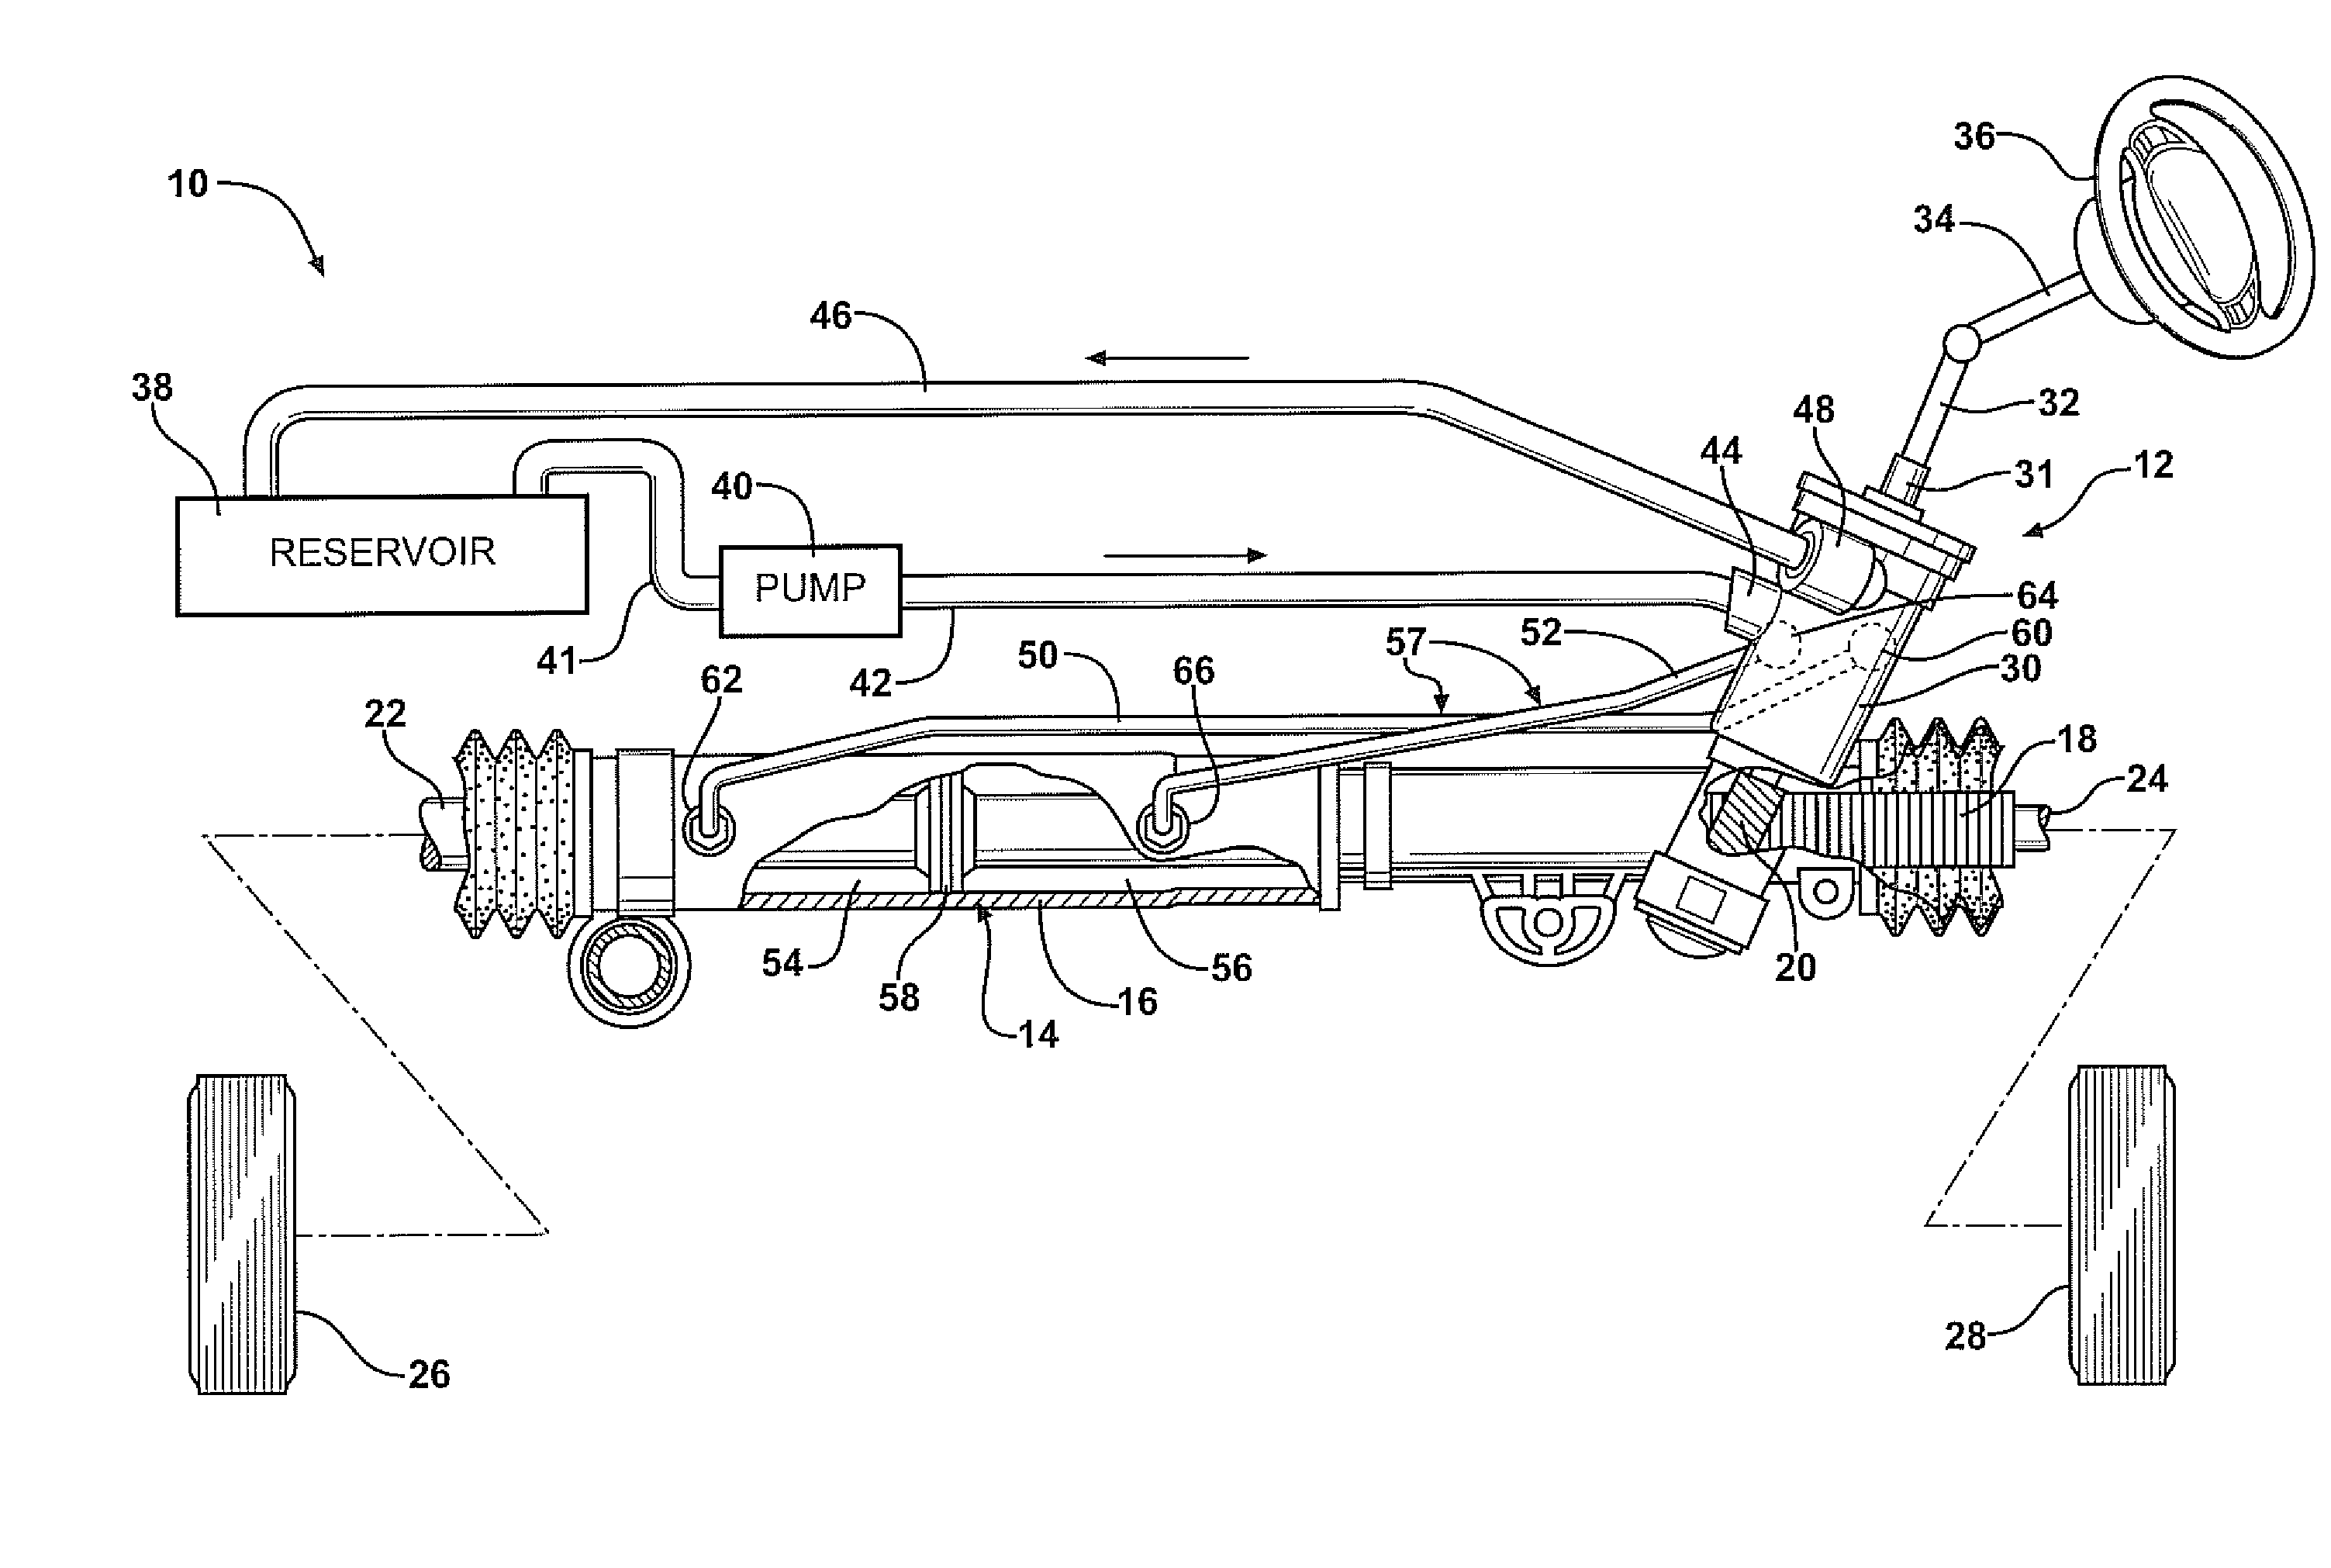 Method of reducing steering instability in hydraulic power steering systems